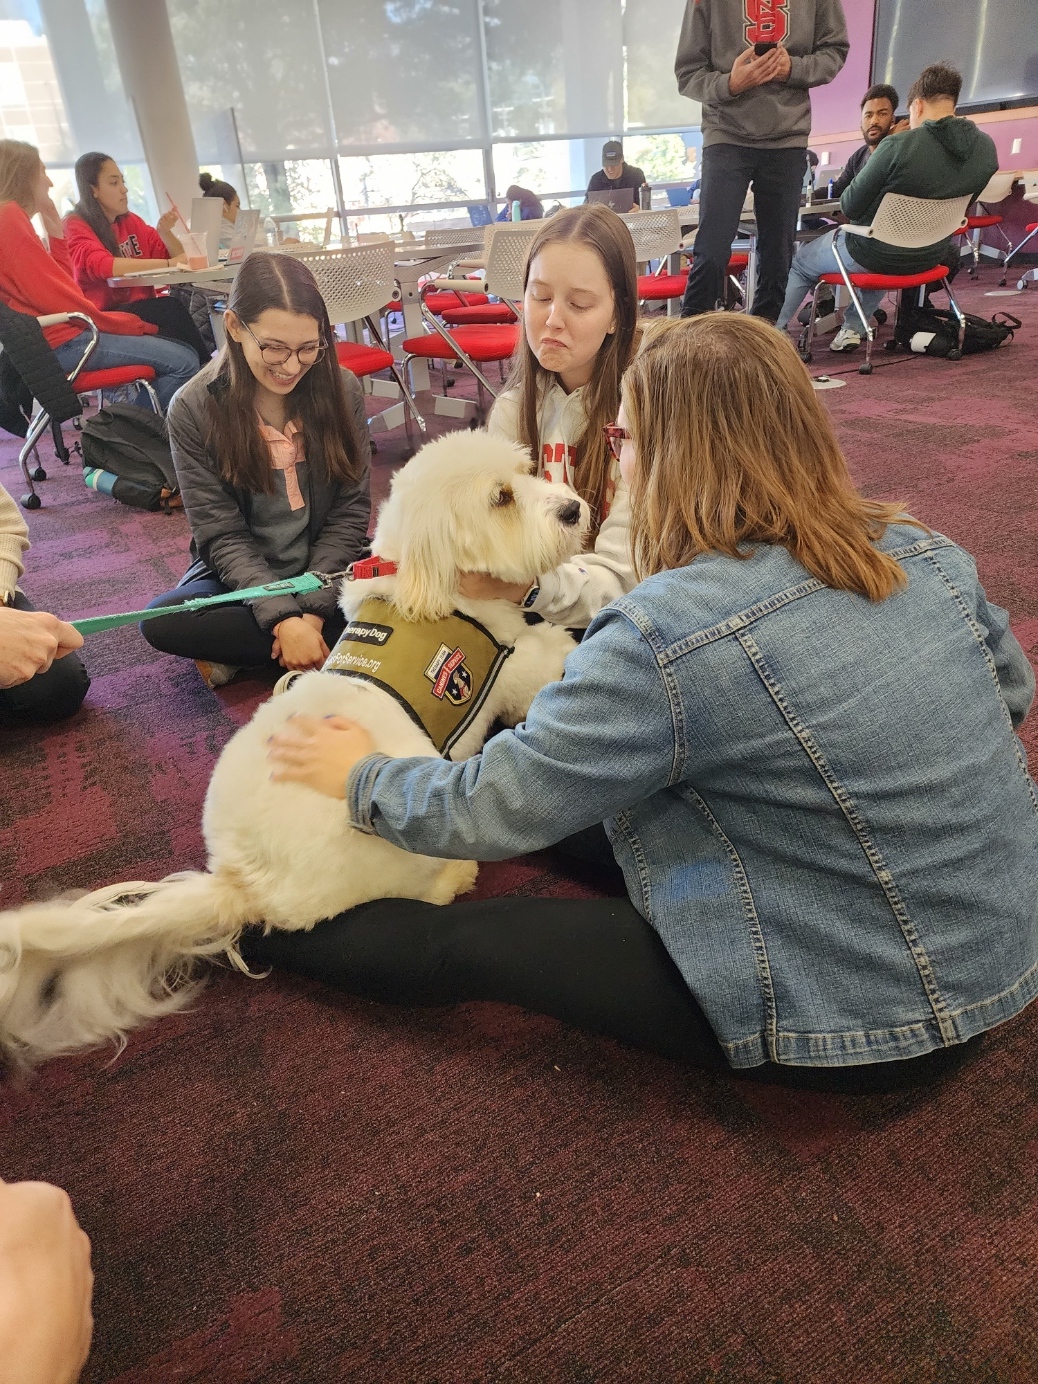 A photo of a dog with students.